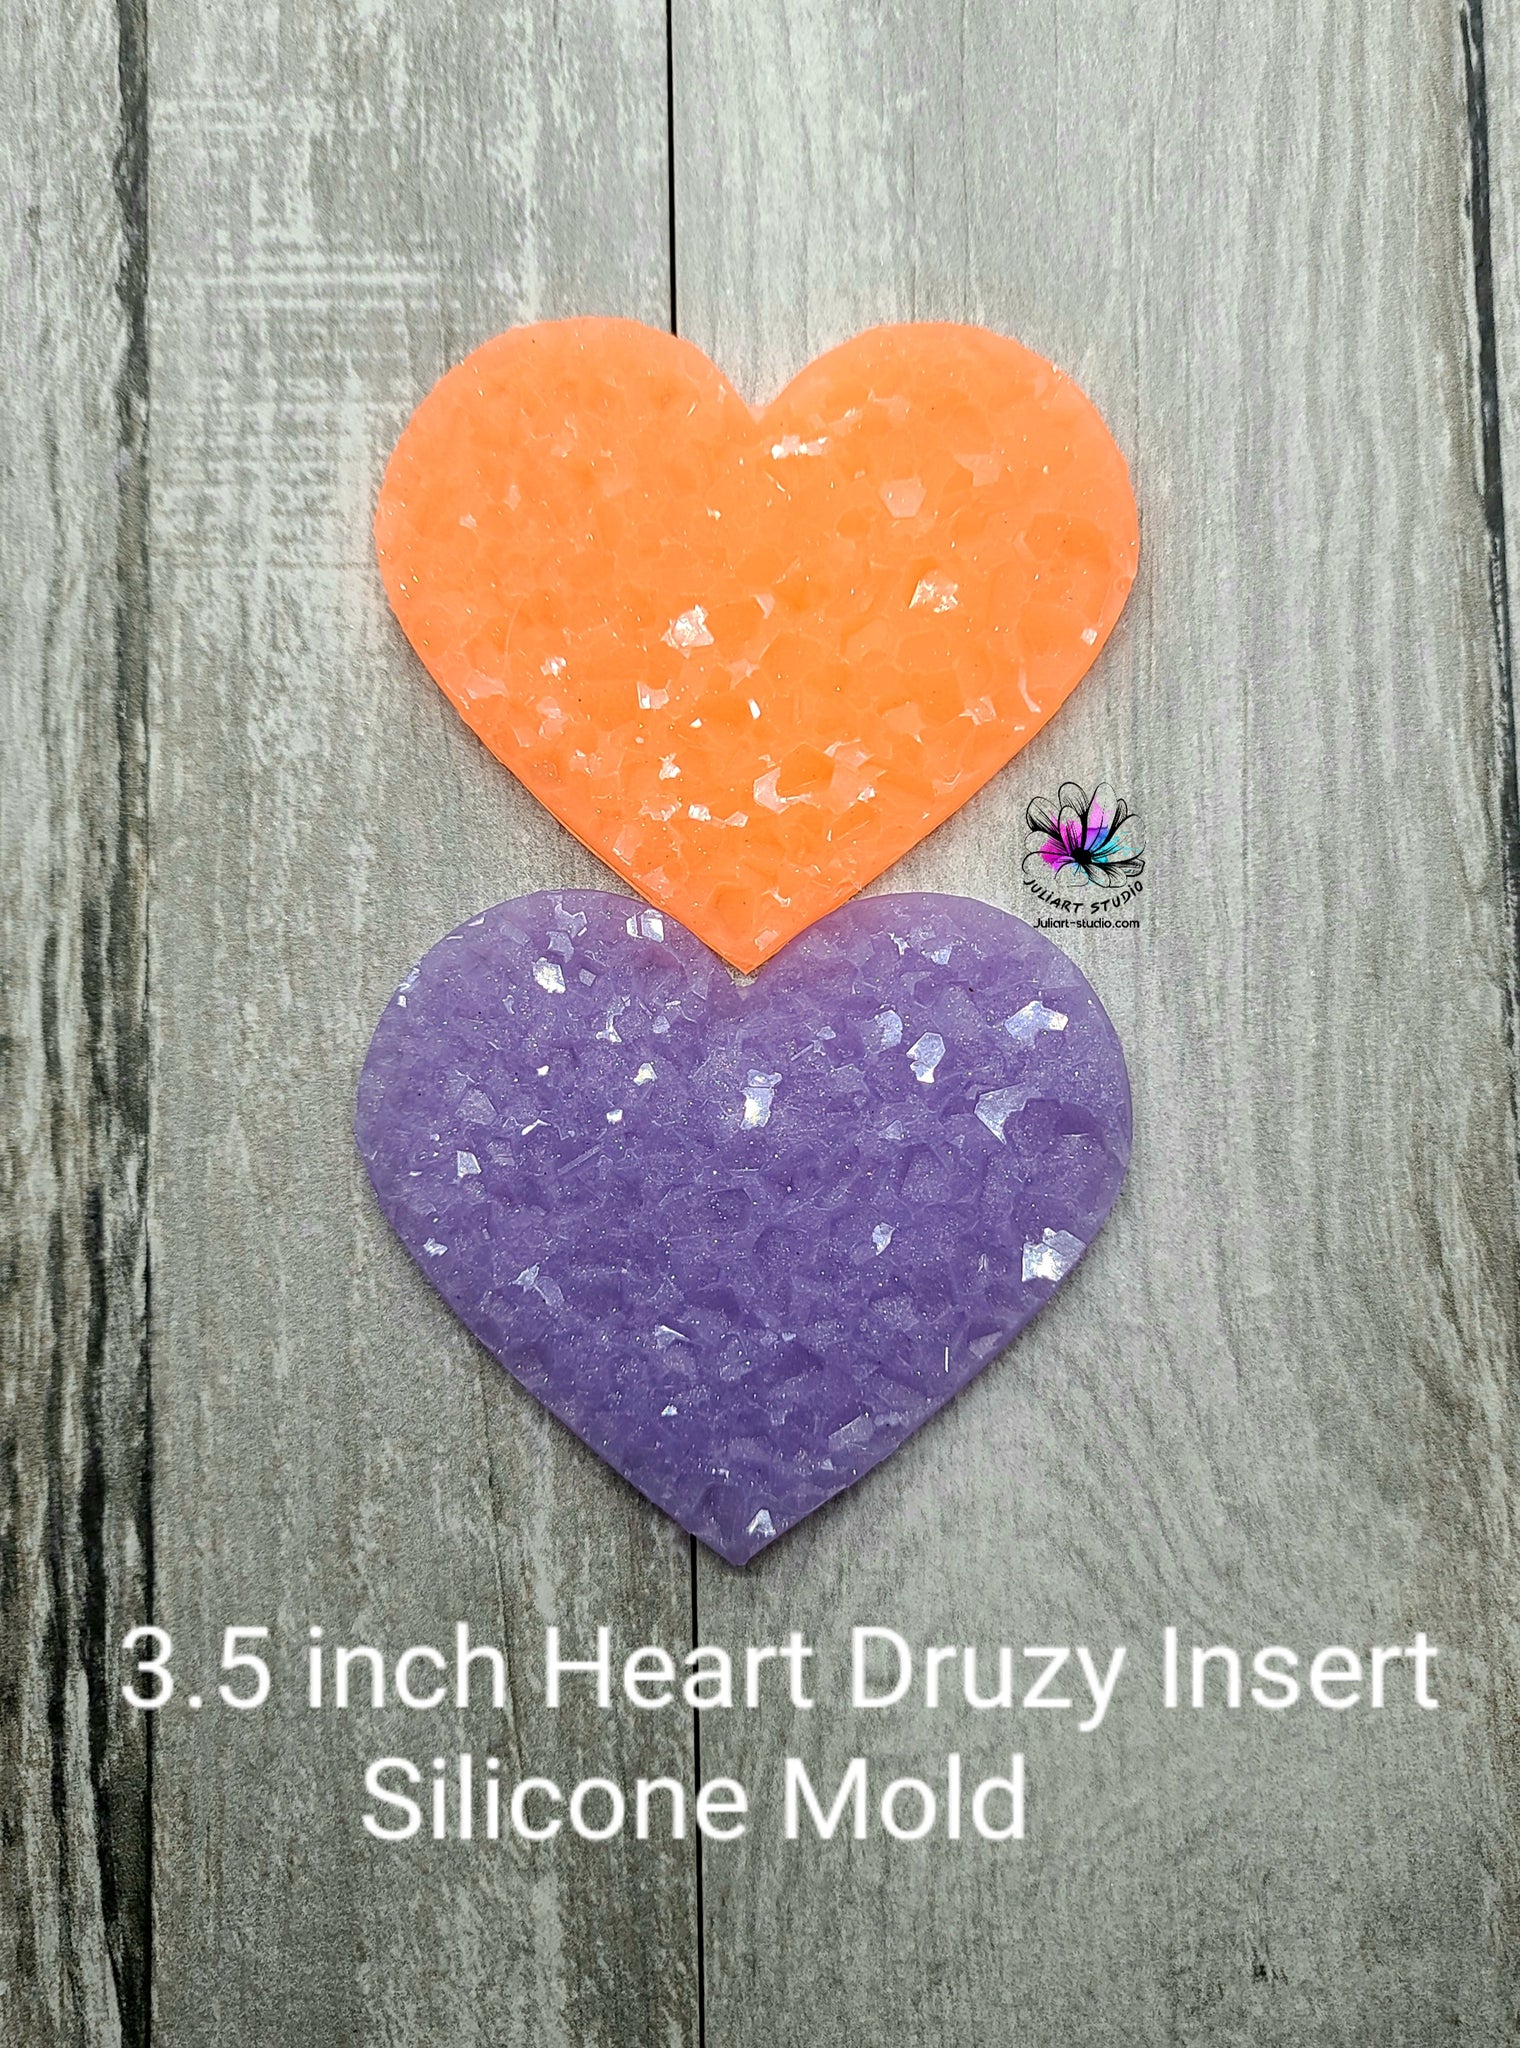 Druzy Heart Shaped Silicone Mold 